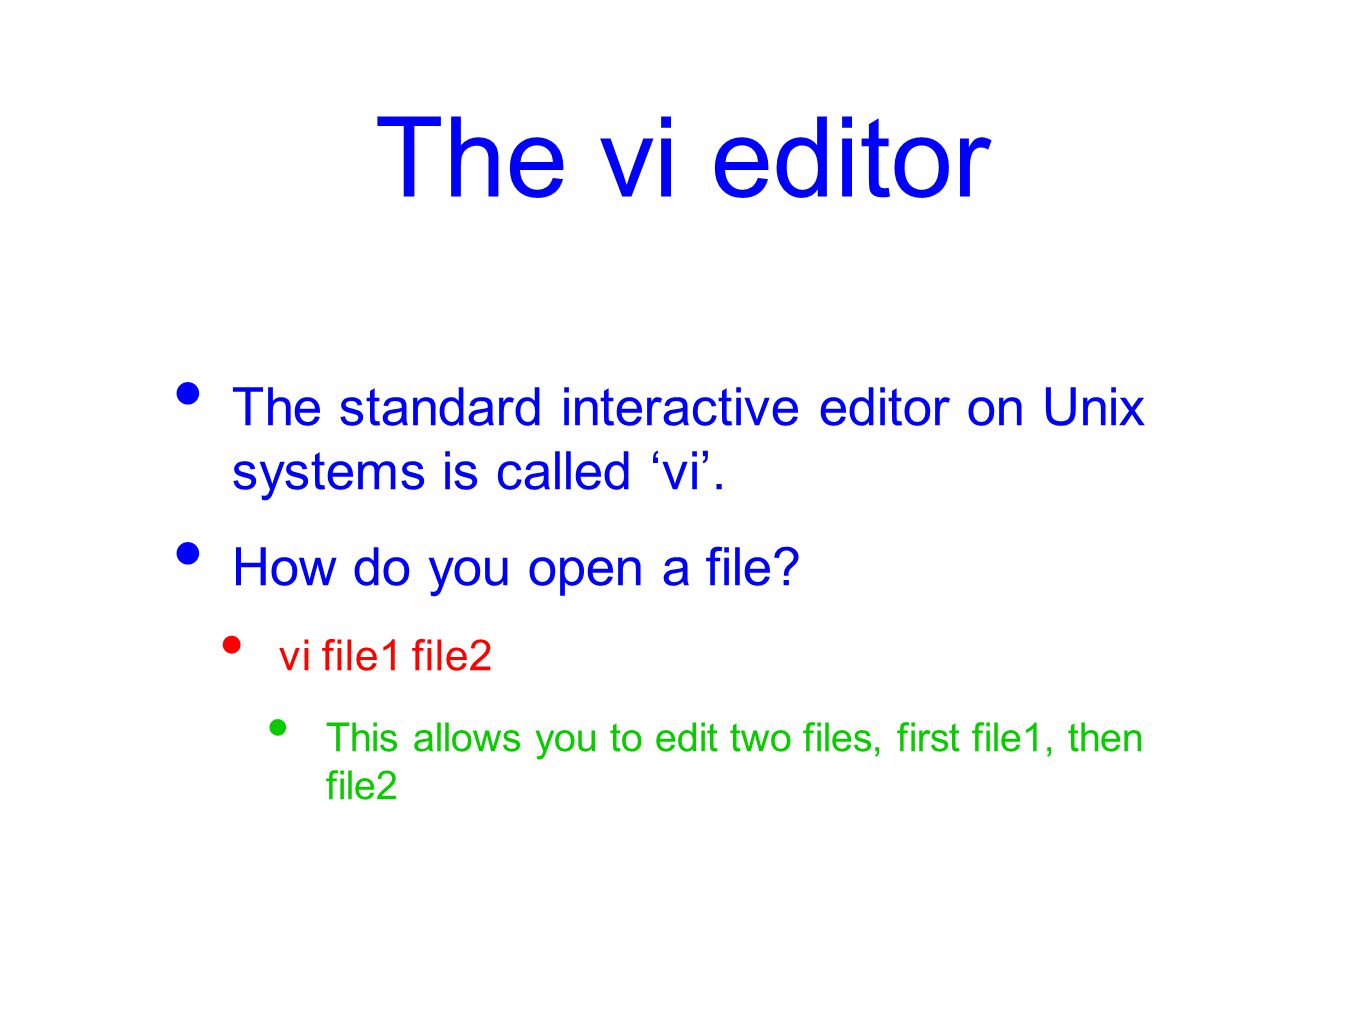 The vi editor The standard interactive editor on Unix systems is called ‘vi’.